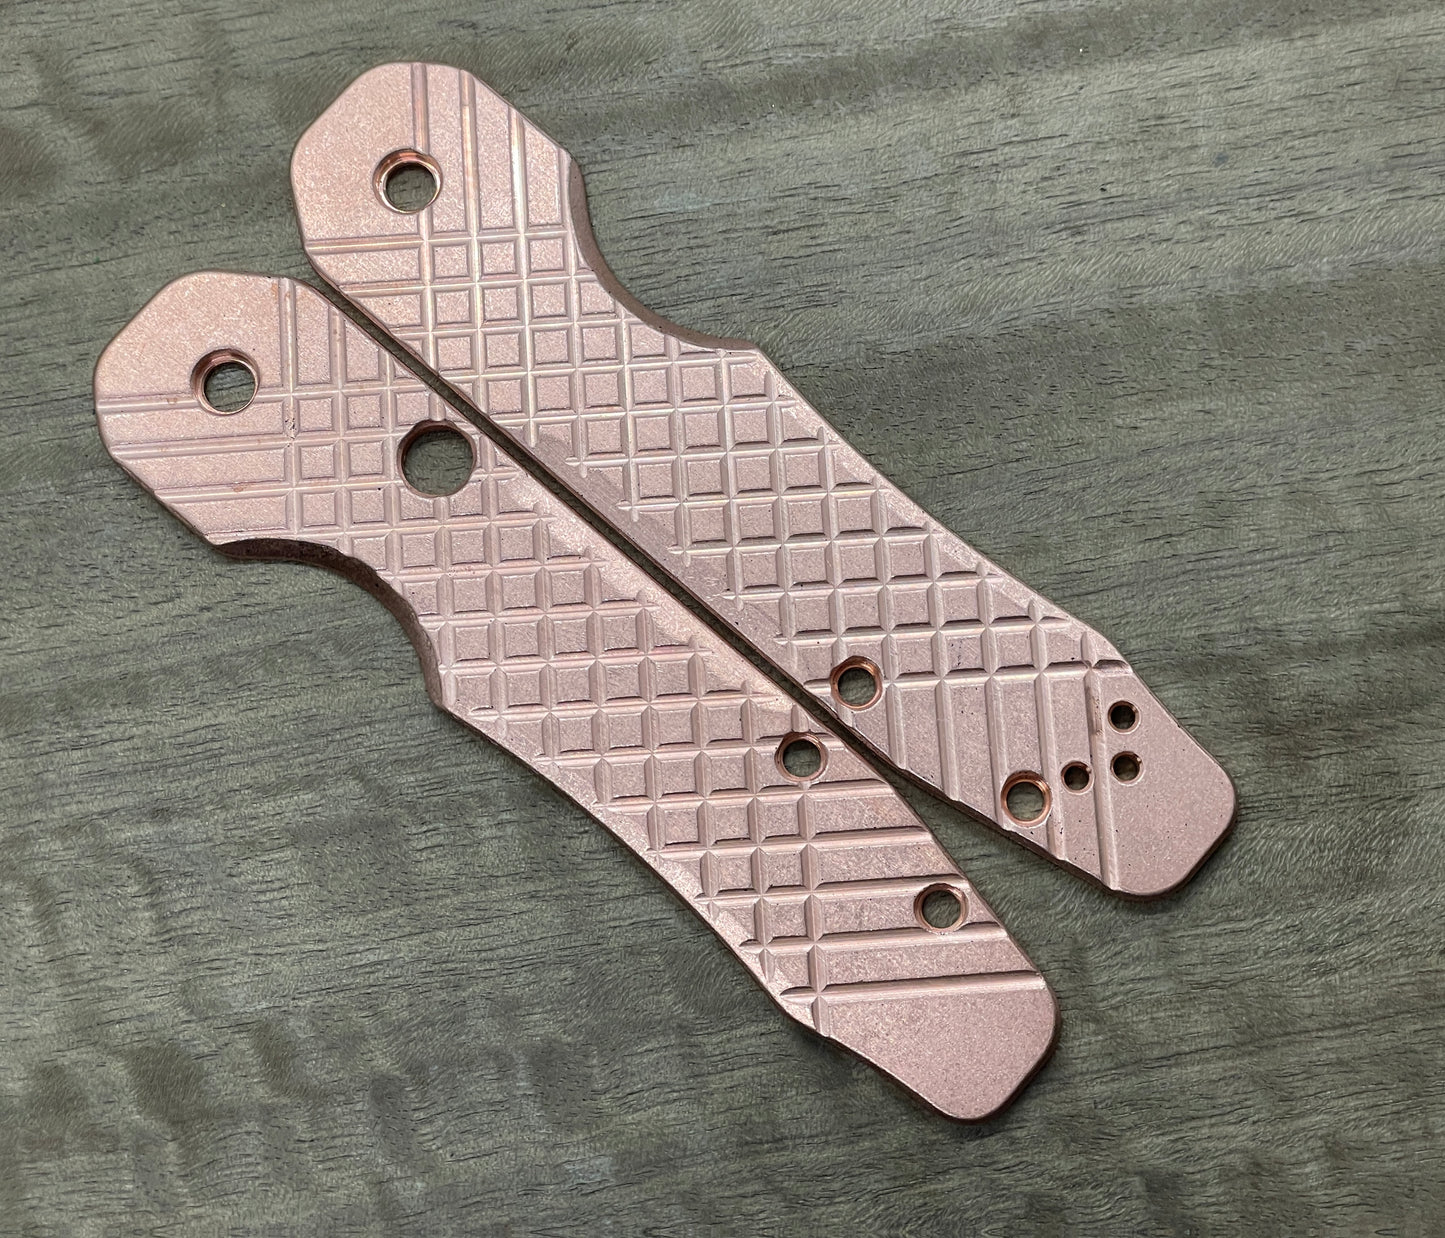 FRAG Cnc milled Tumbled Copper Scales for Spyderco SMOCK